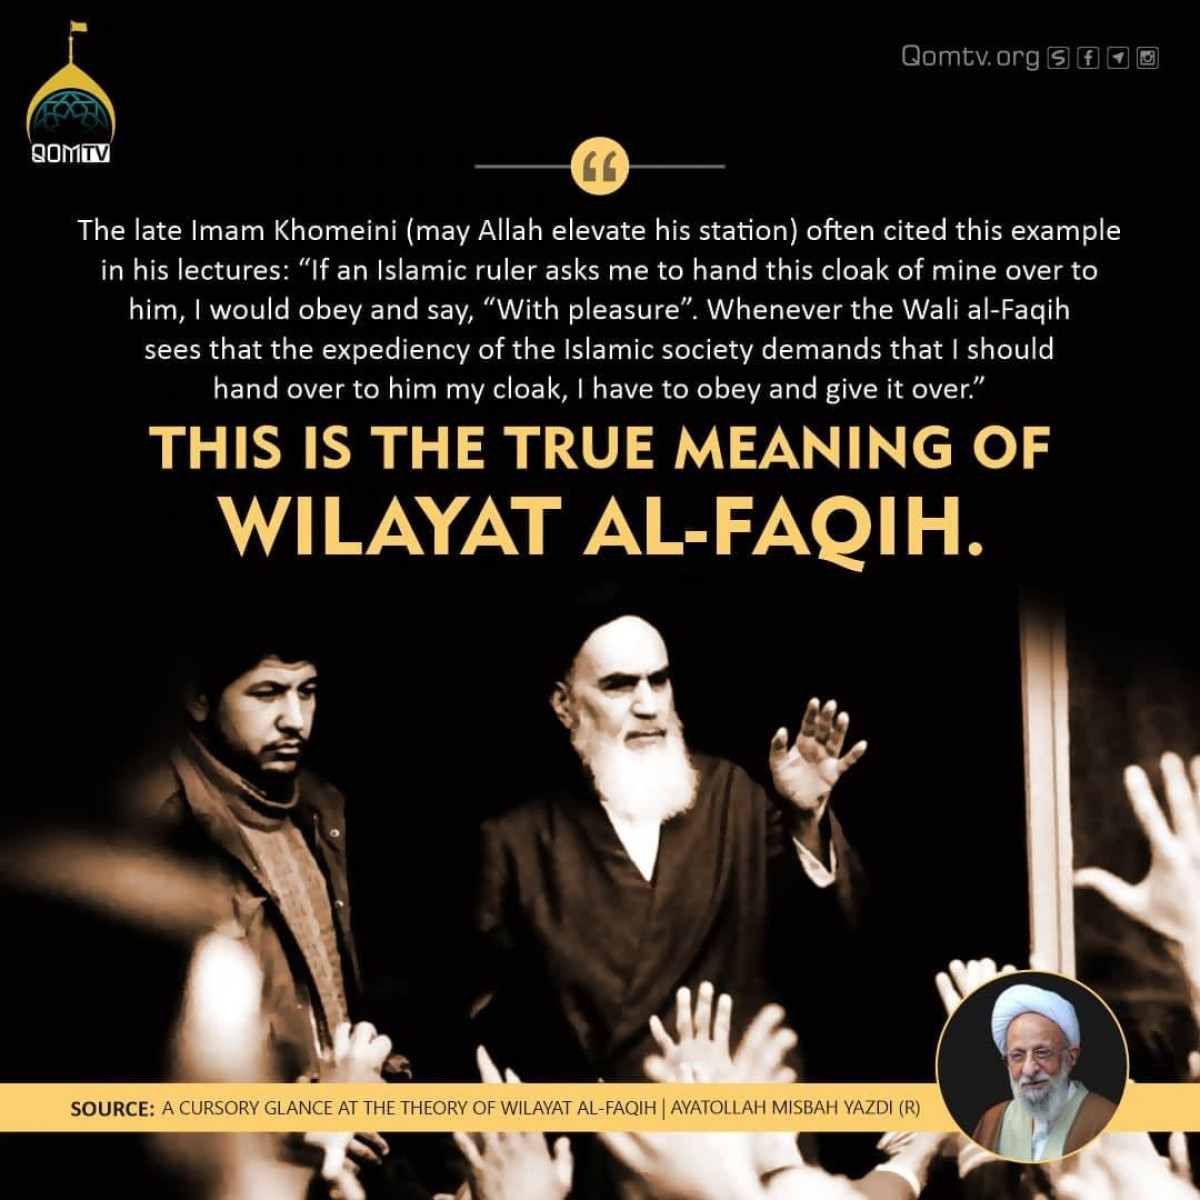 The late Imam Khomeini (may Allah elevate his station) often cited this example in his lectures